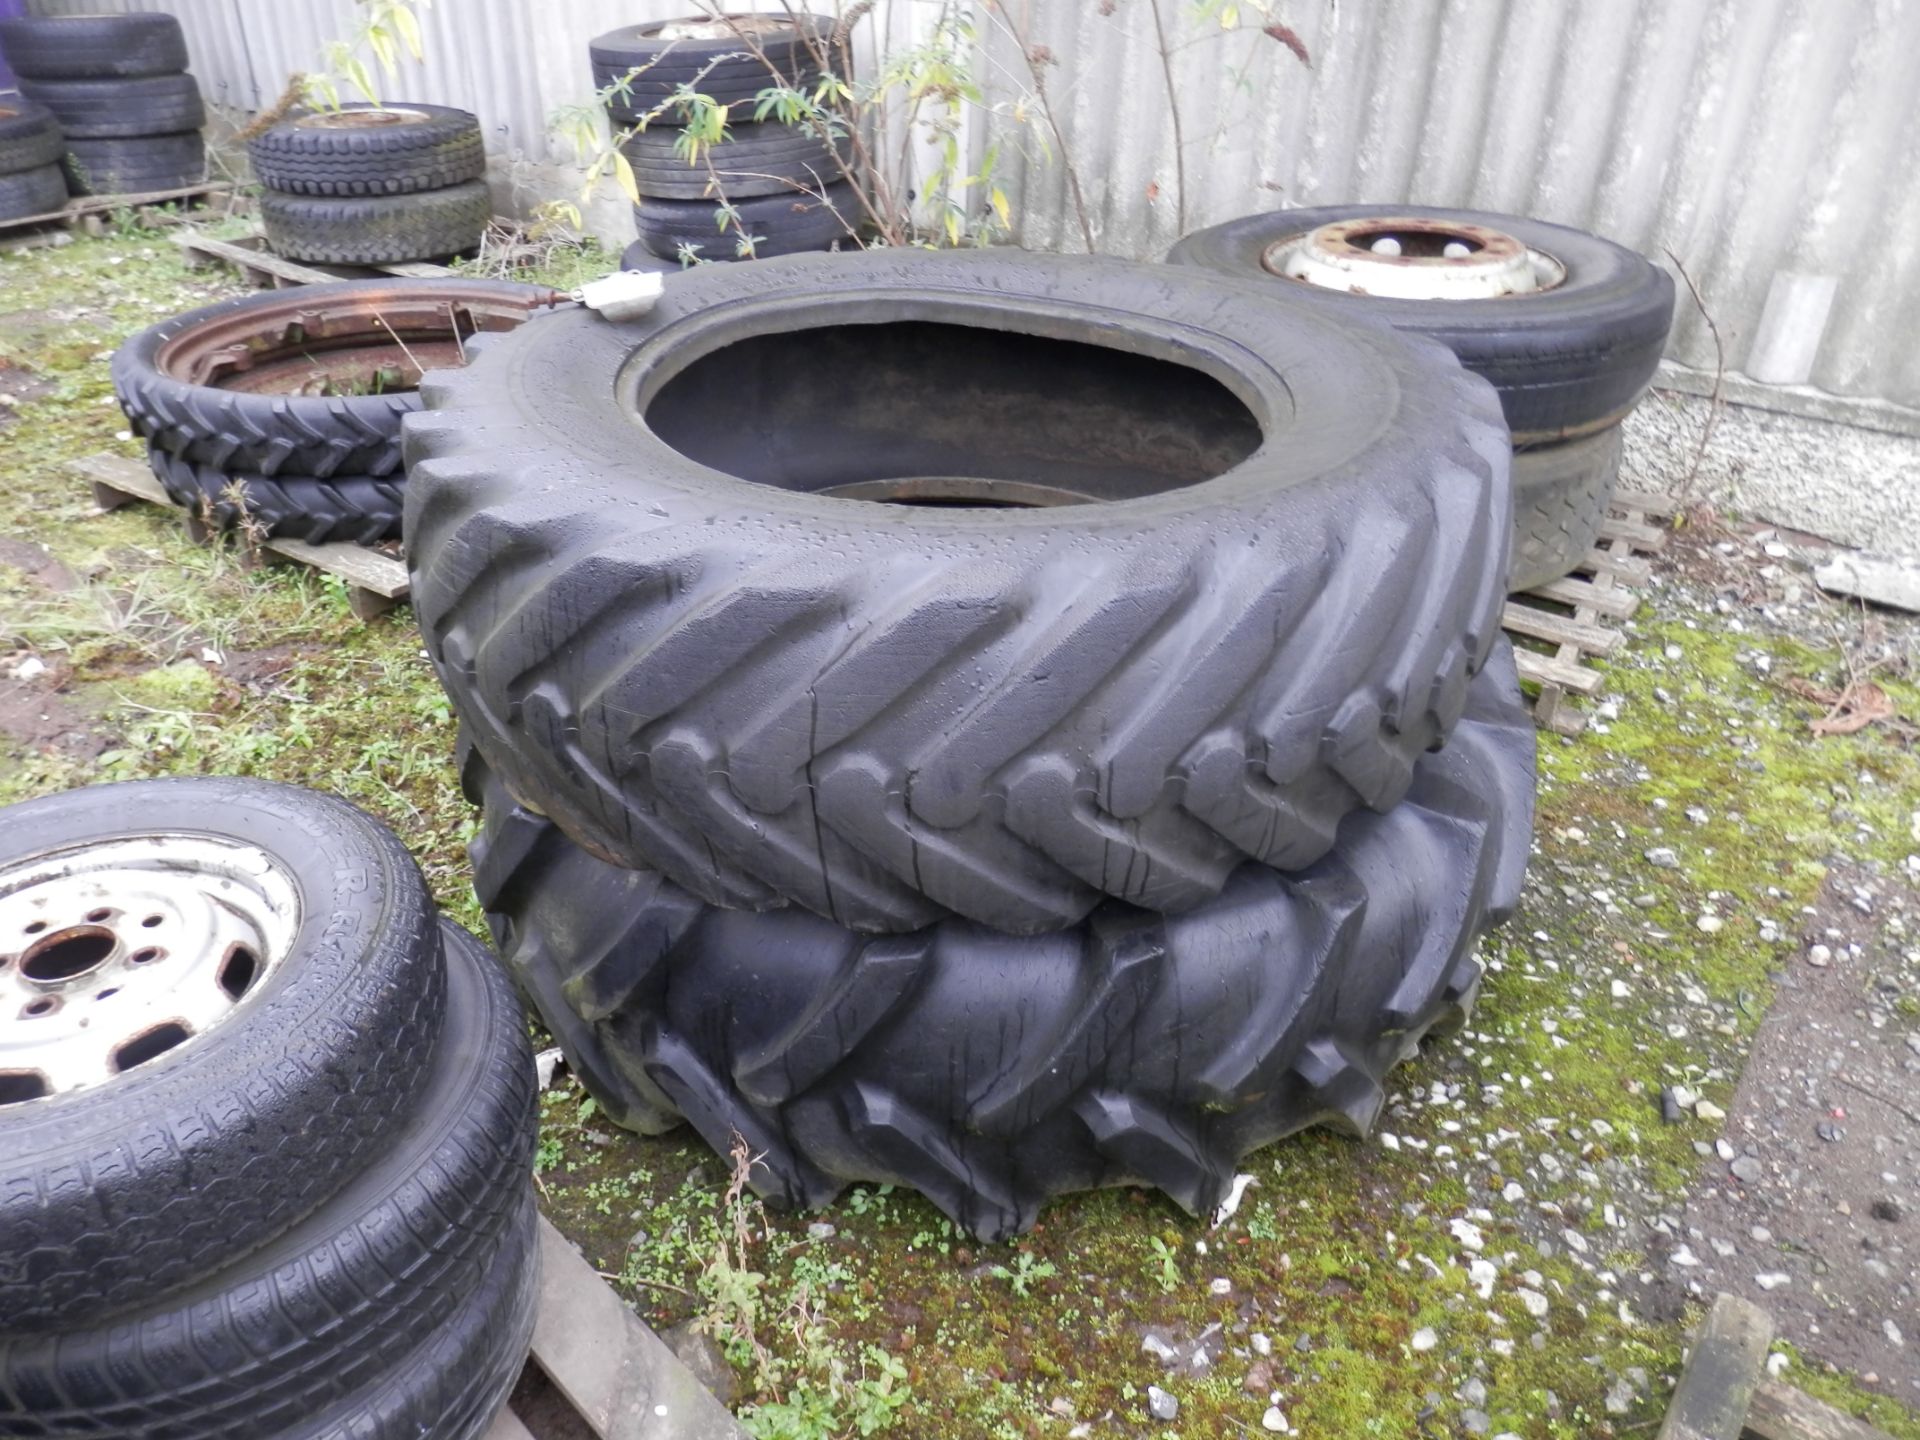 85 + ASSORTED LORRY, CAR & TRAILER TYRES & WHEELS, AS PICTURED. BUYER TO COLLECT COMPLETE JOBLOT. - Image 3 of 10